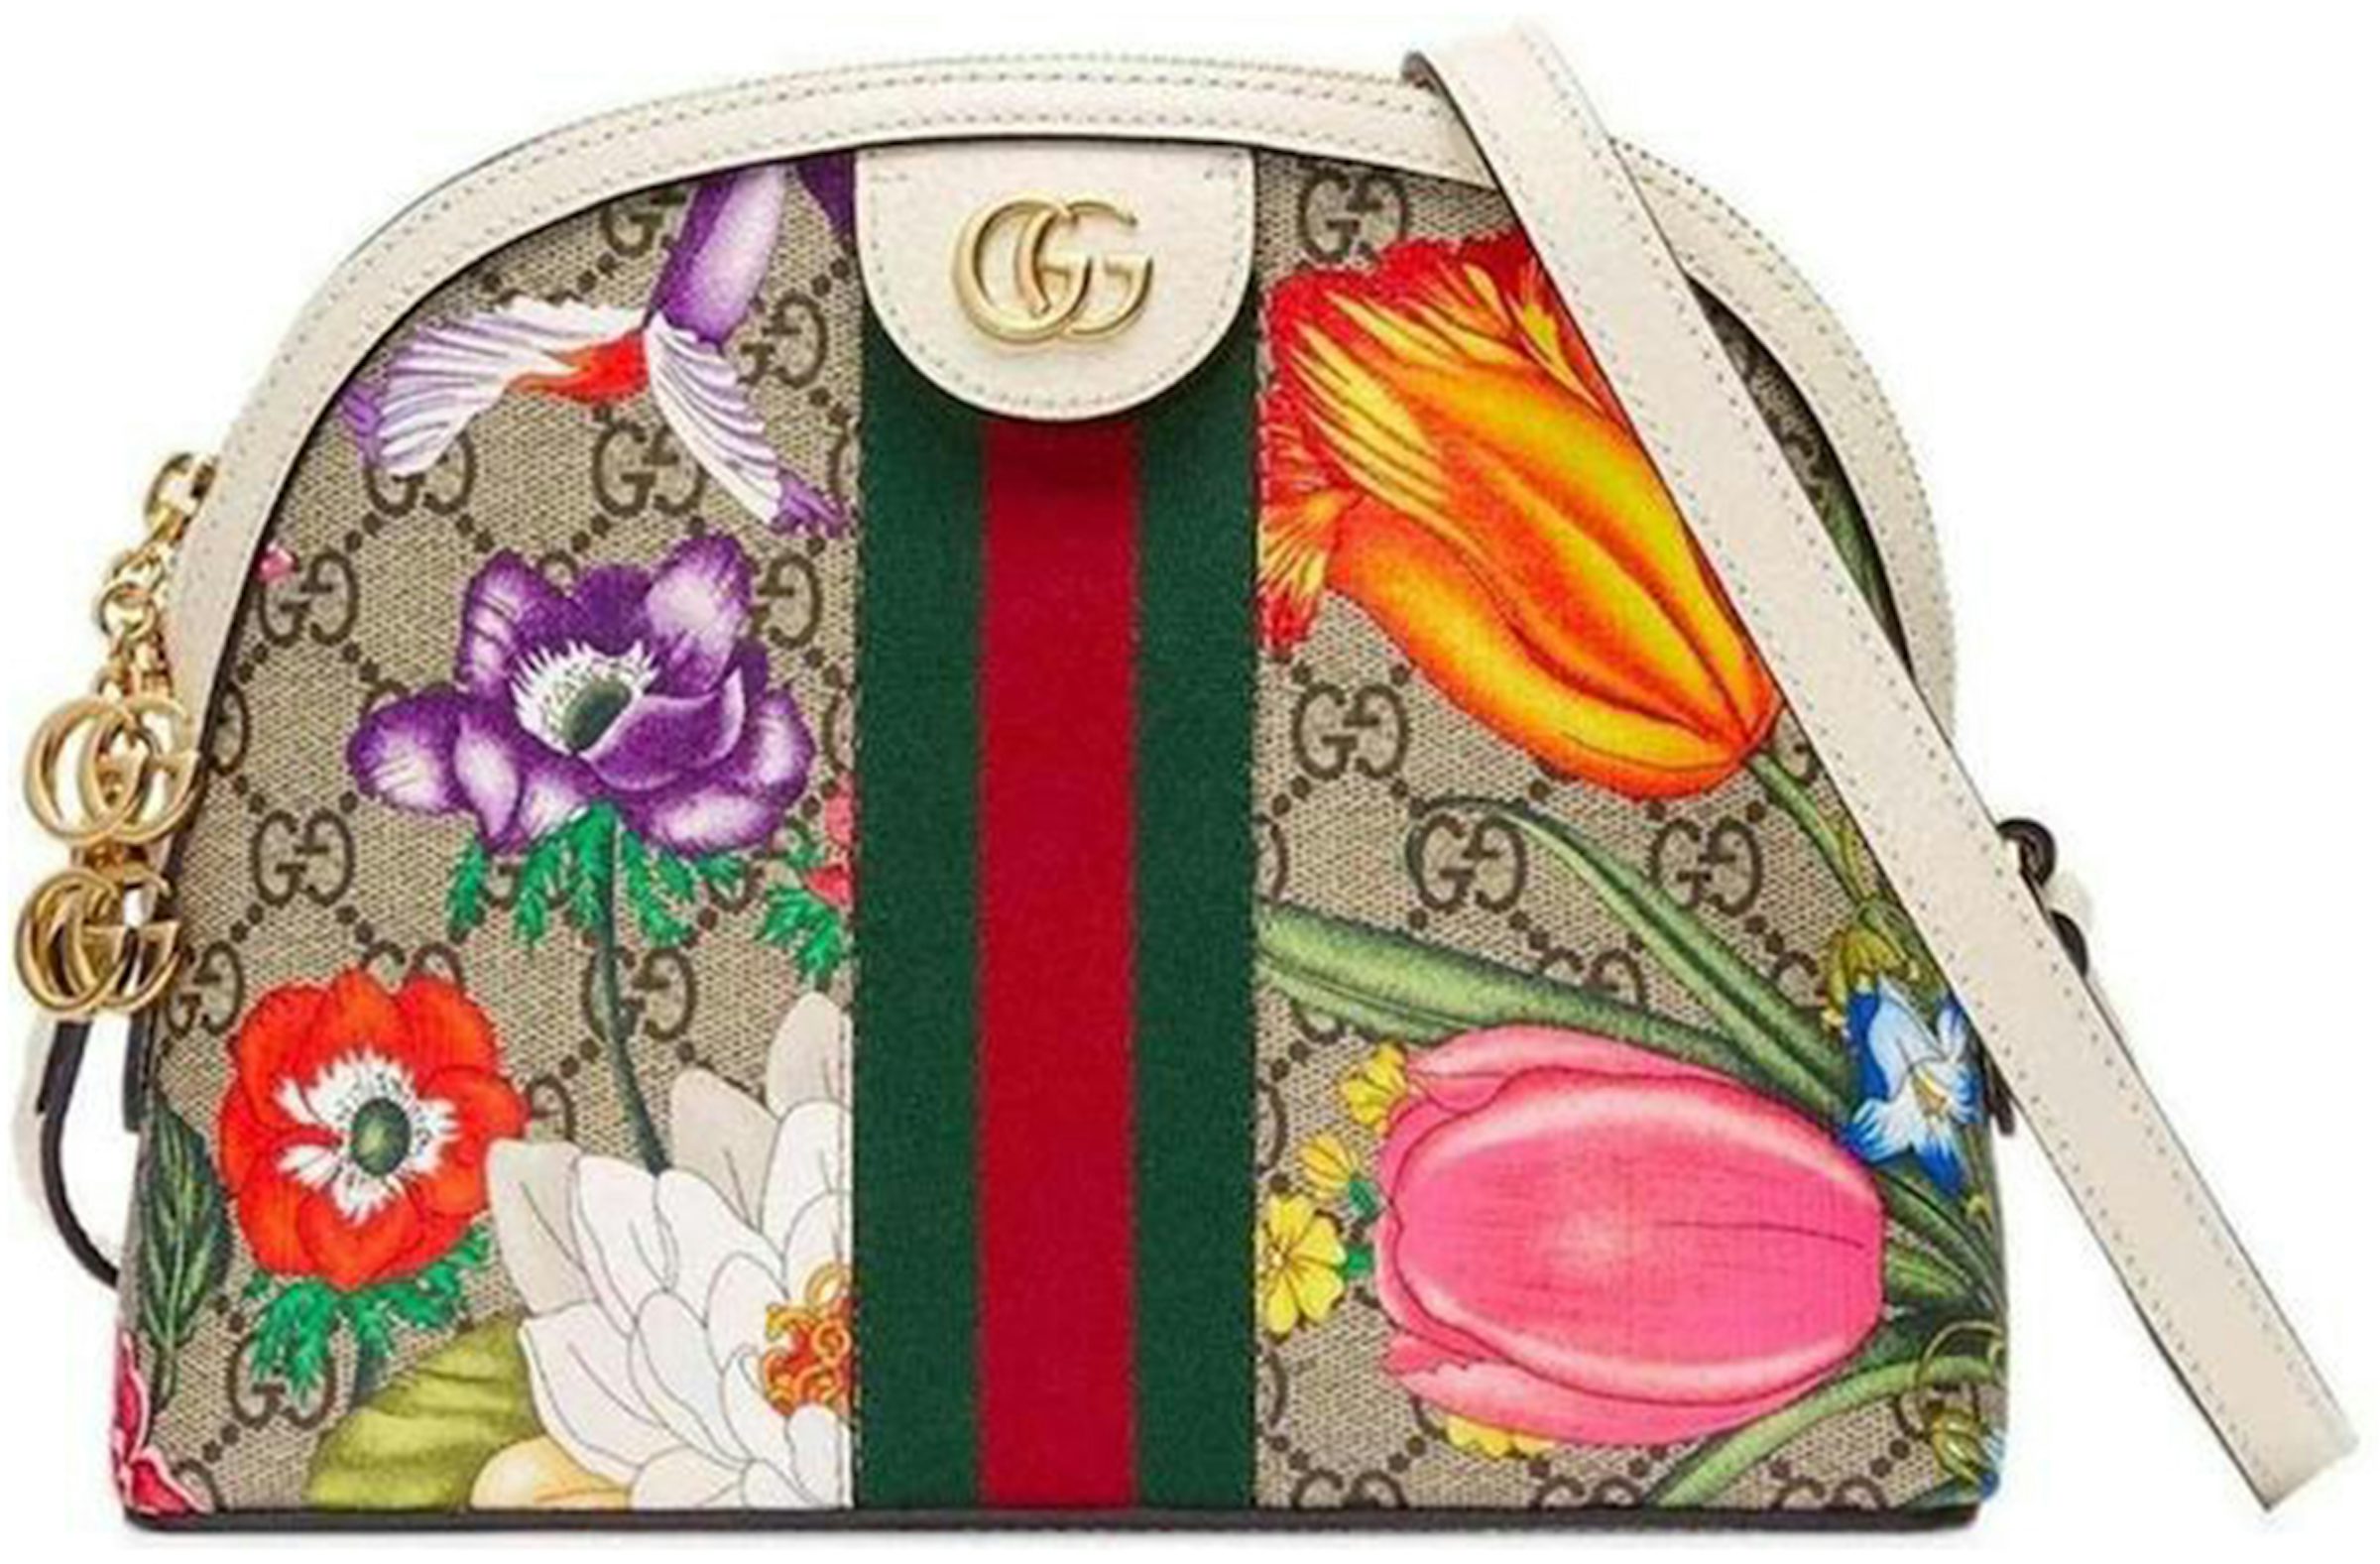 NEW $490 GUCCI Tan GG Supreme Canvas Ophidia GG FLORA COIN PURSE Round  WALLET